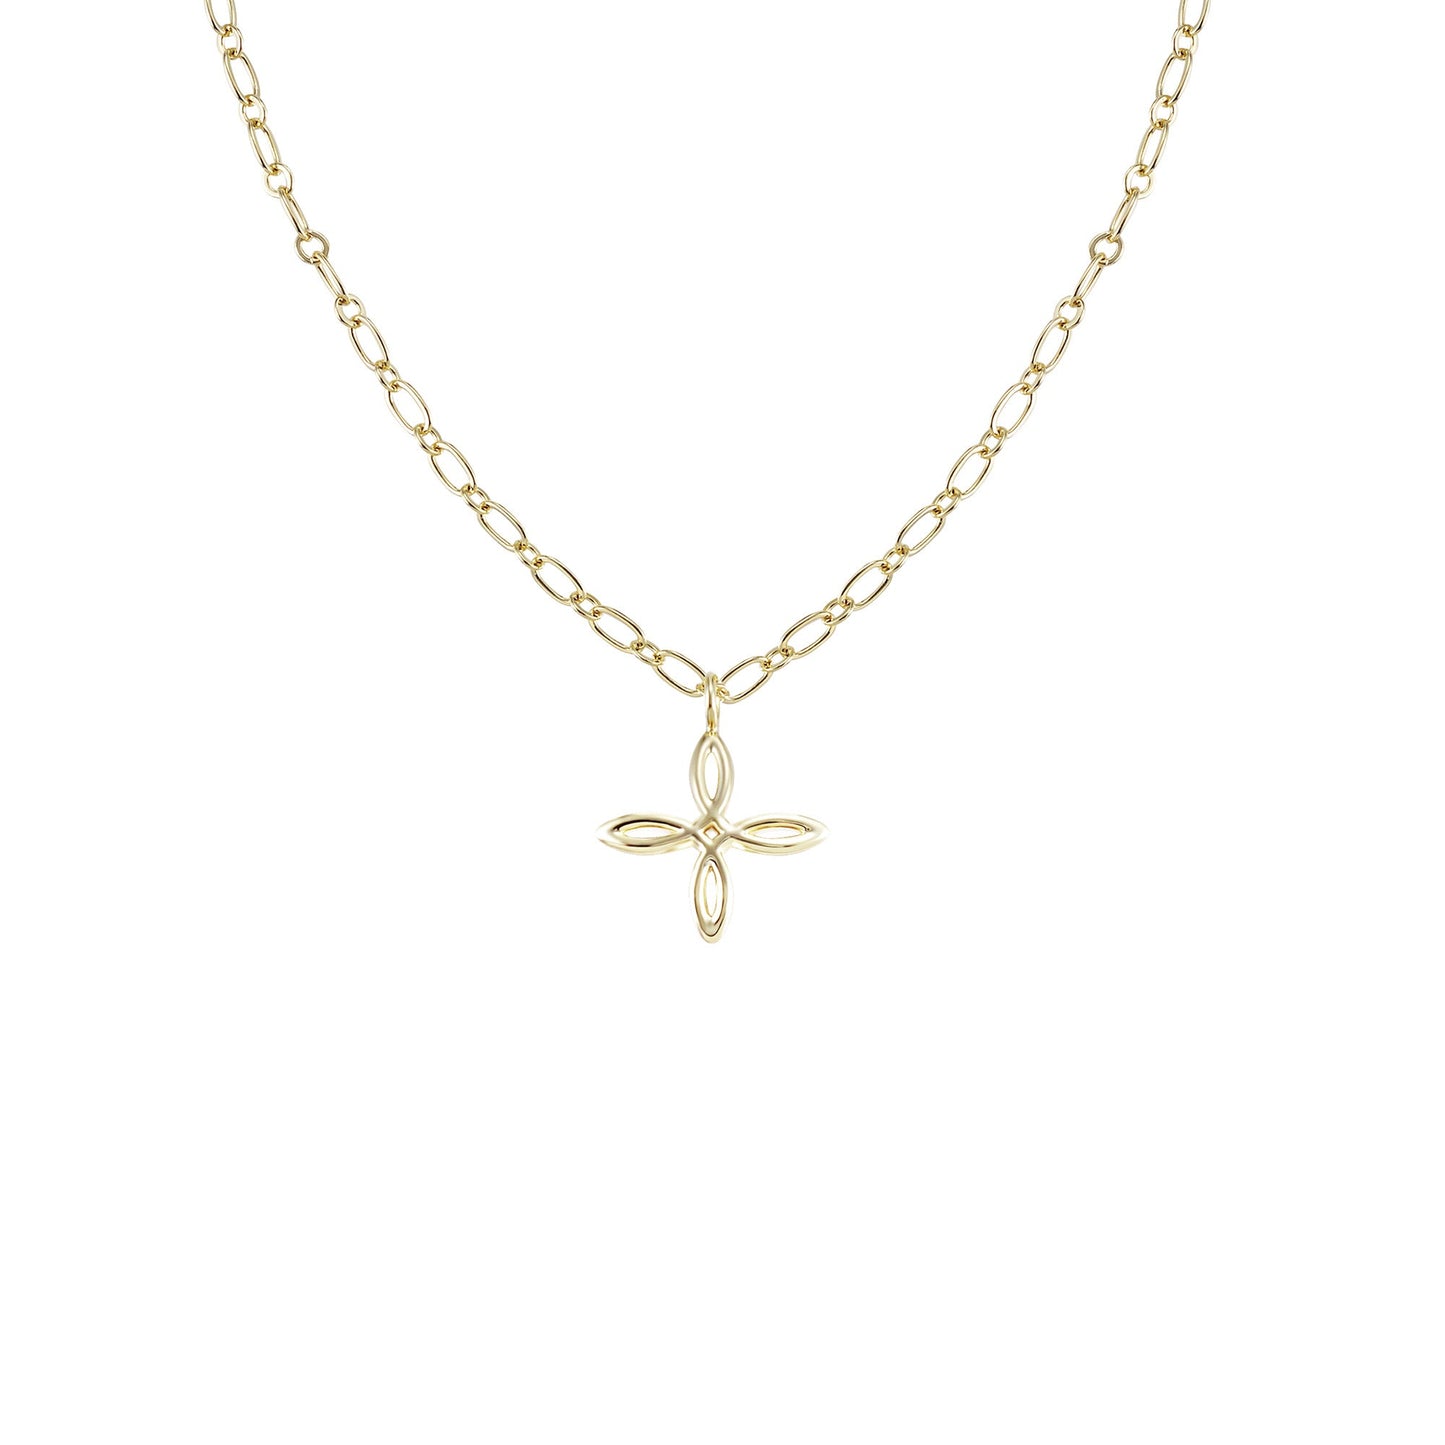 Natalie Wood Designs "She's Classic" Cross Drop Necklace-Gold